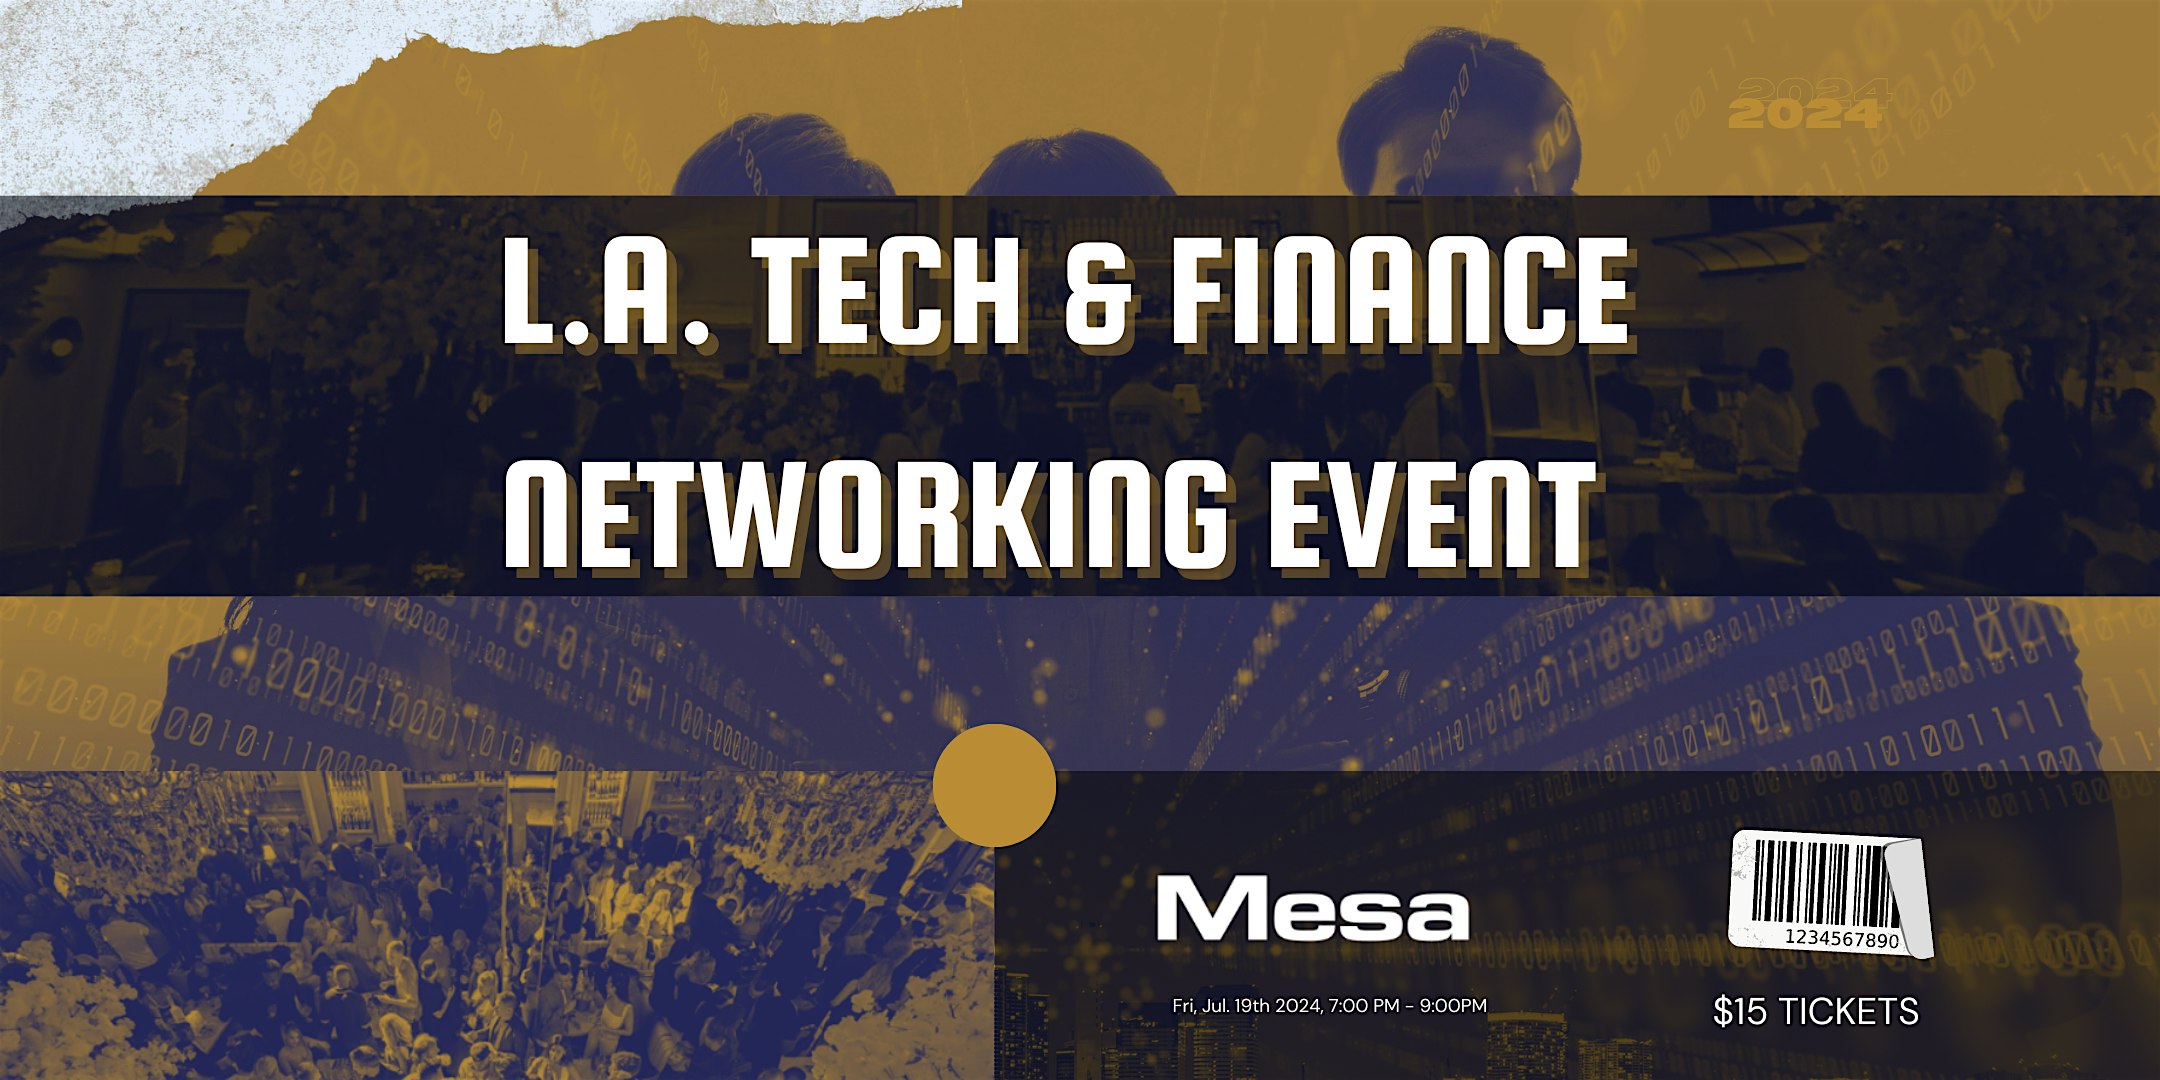 Los Angeles Tech & Finance Networking Event At Mesa